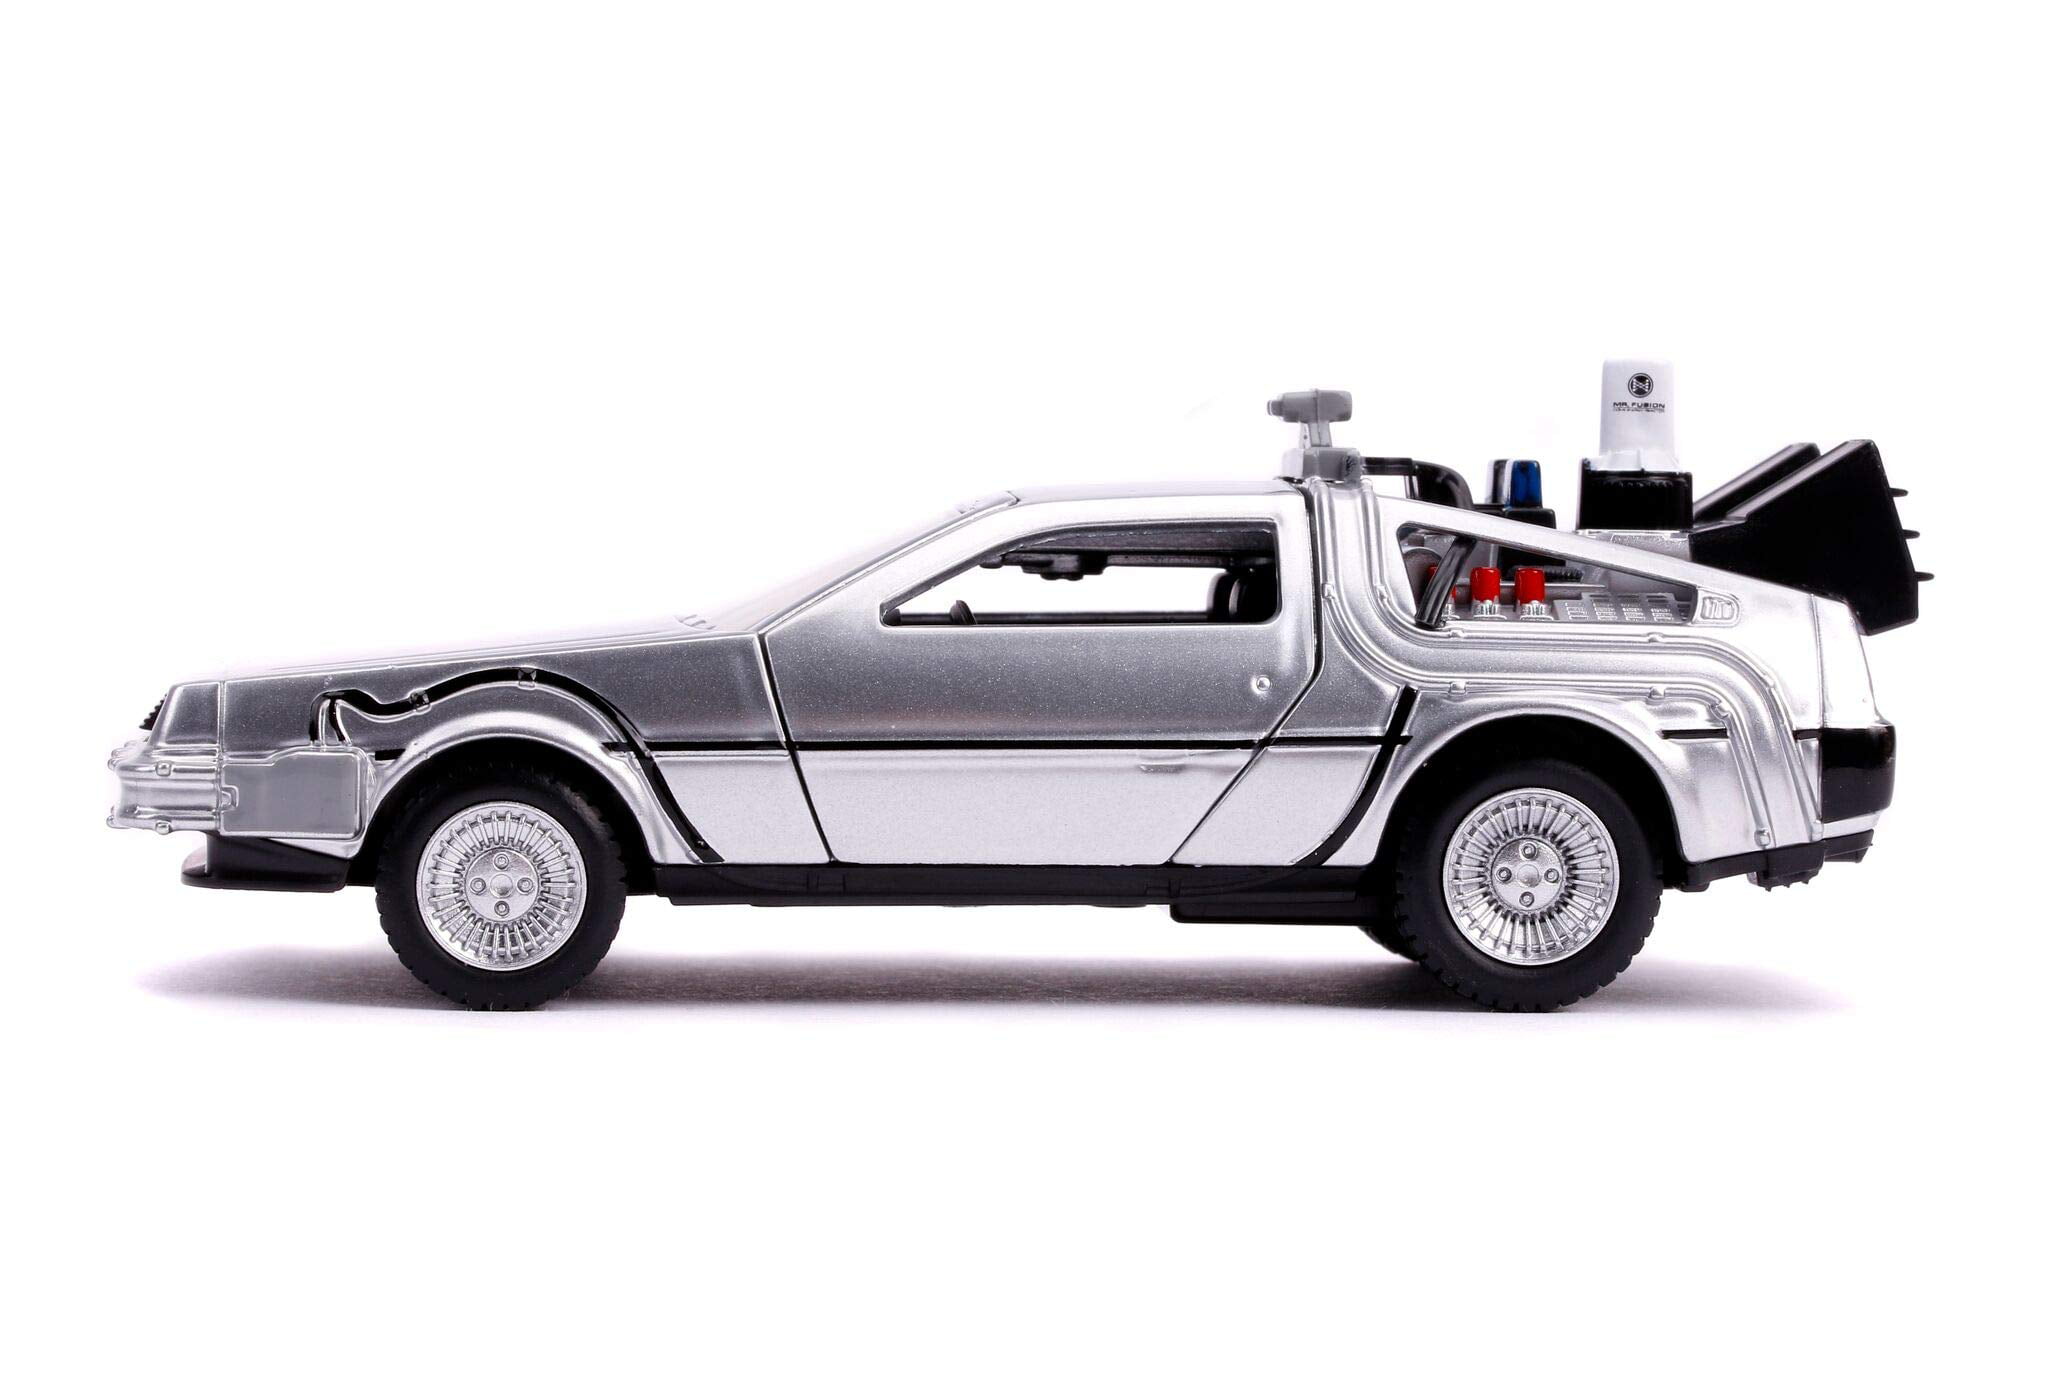 BACK TO THE FUTURE DELOREAN 1:32 SCALE DIE-CAST METAL VEHICLE JADA TOYS CAR 